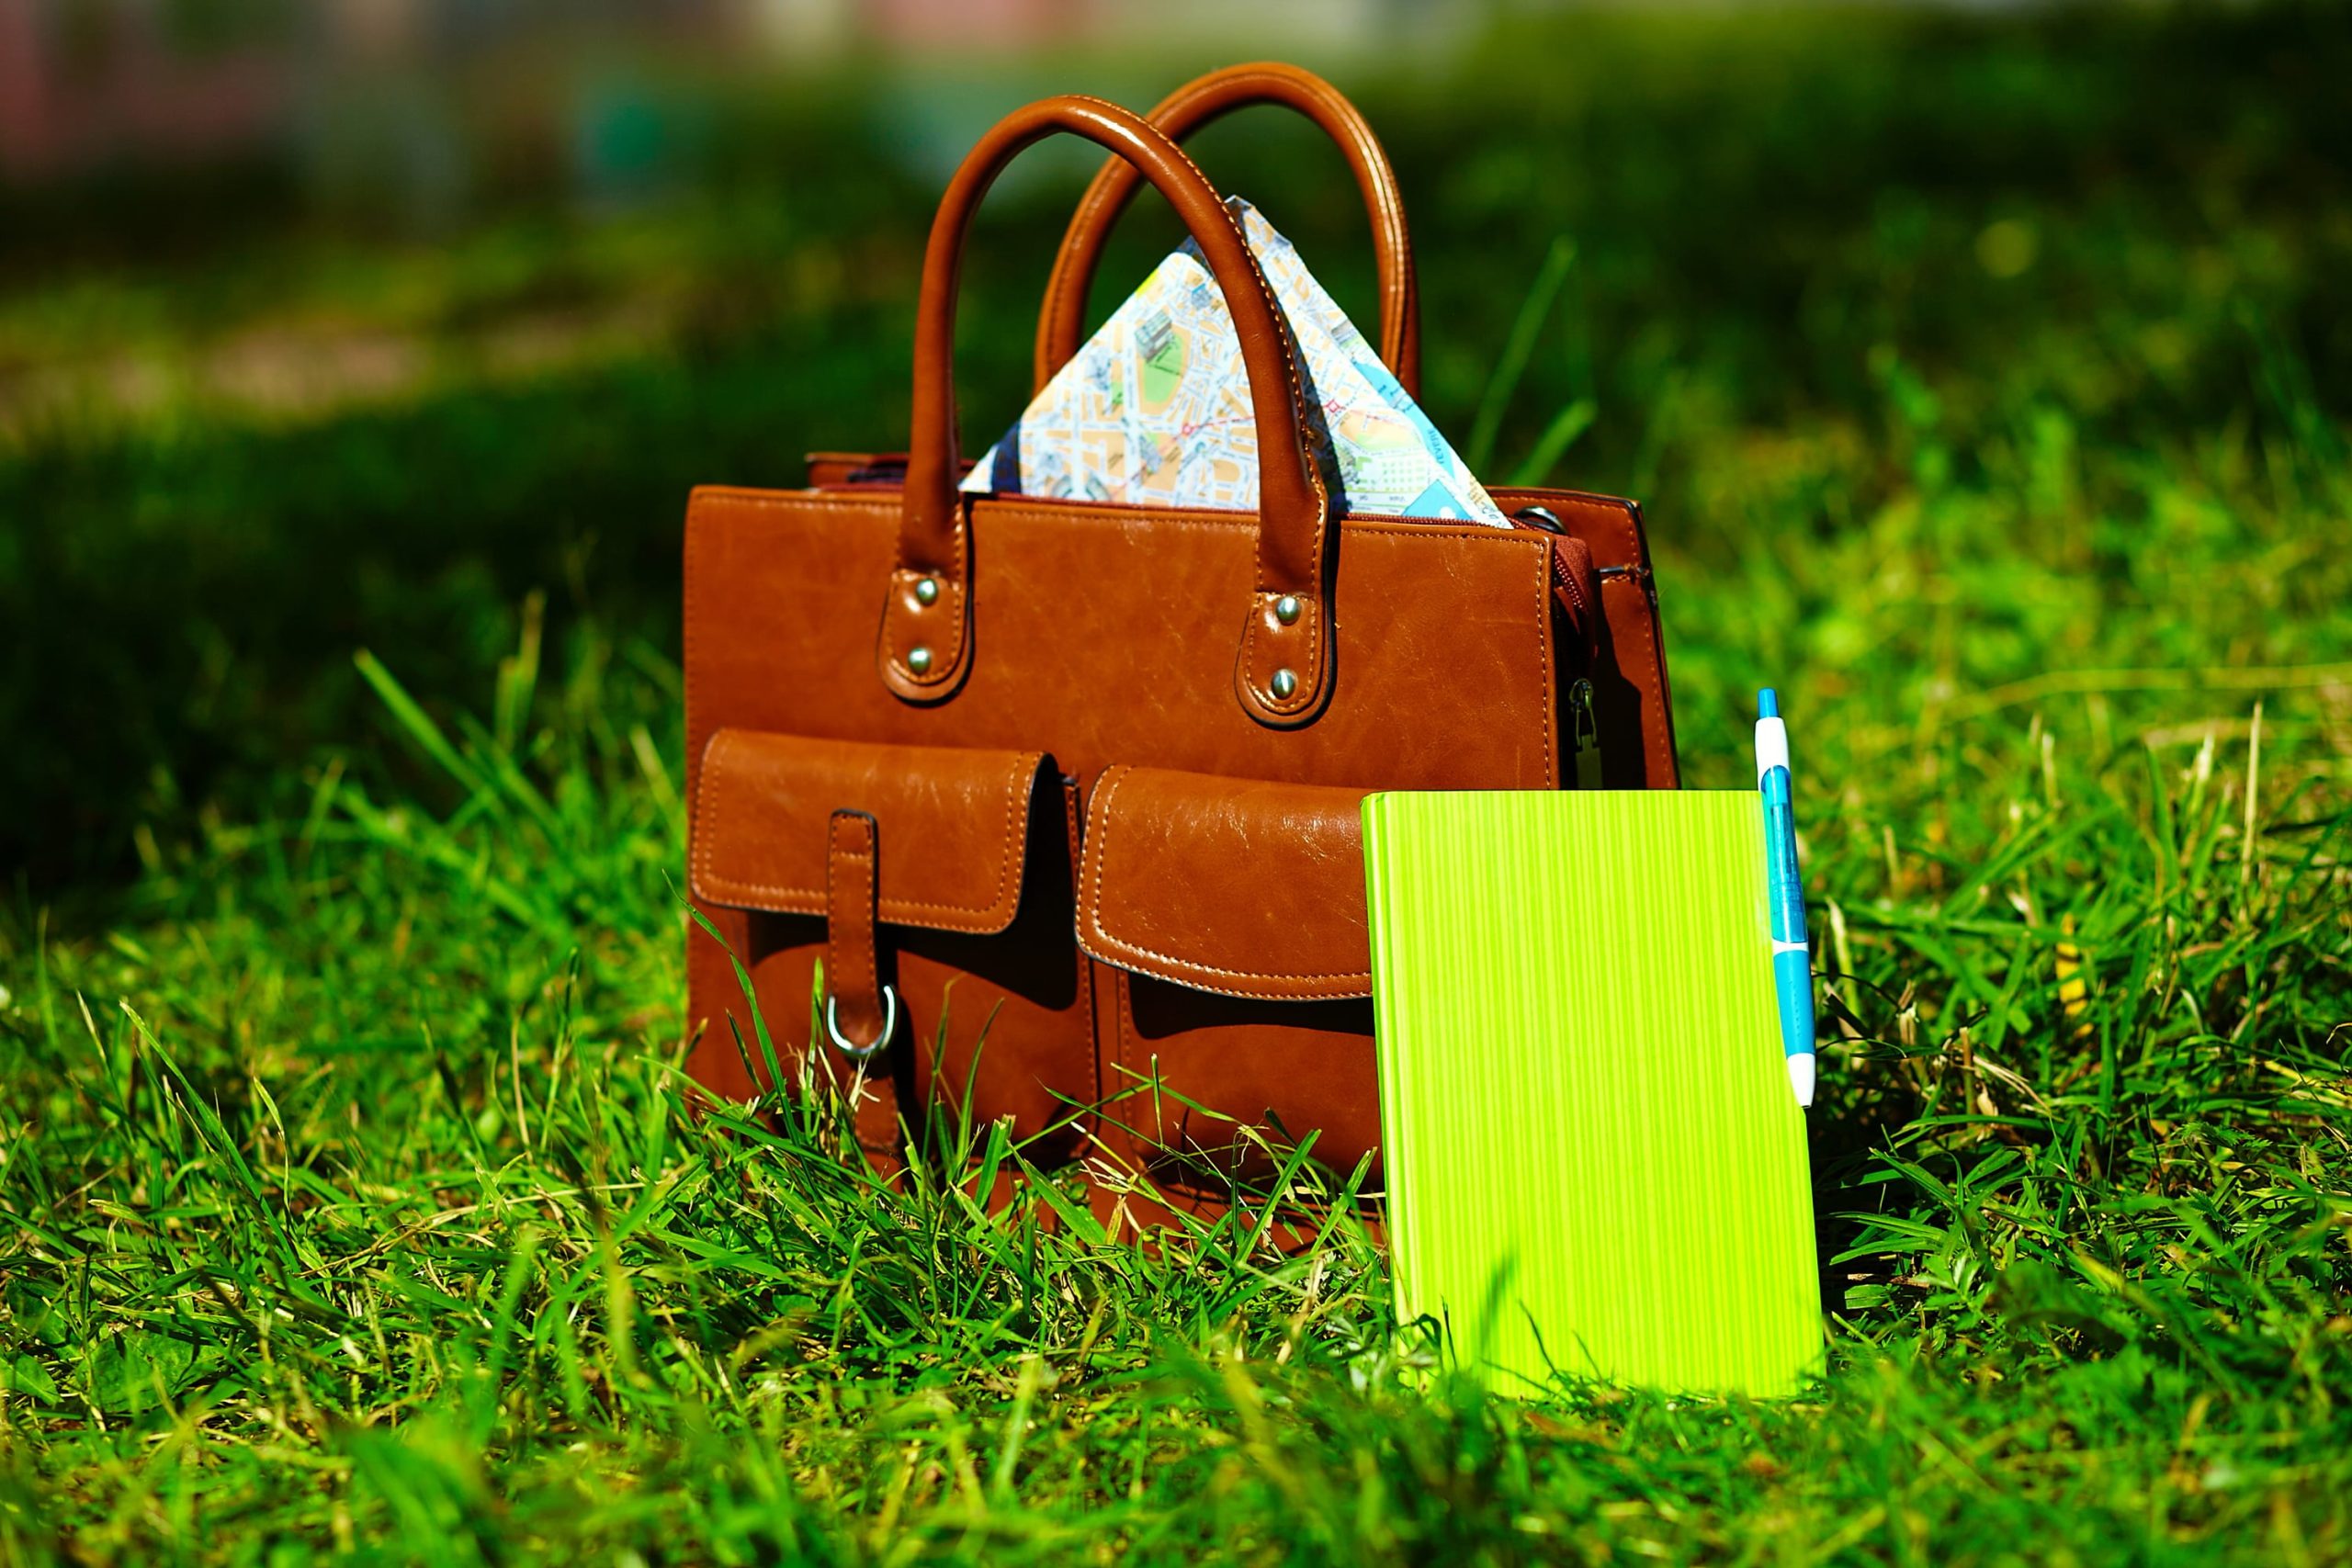 retro-brown-man-leather-bag-notebook-bright-colorful-summer-grass-park